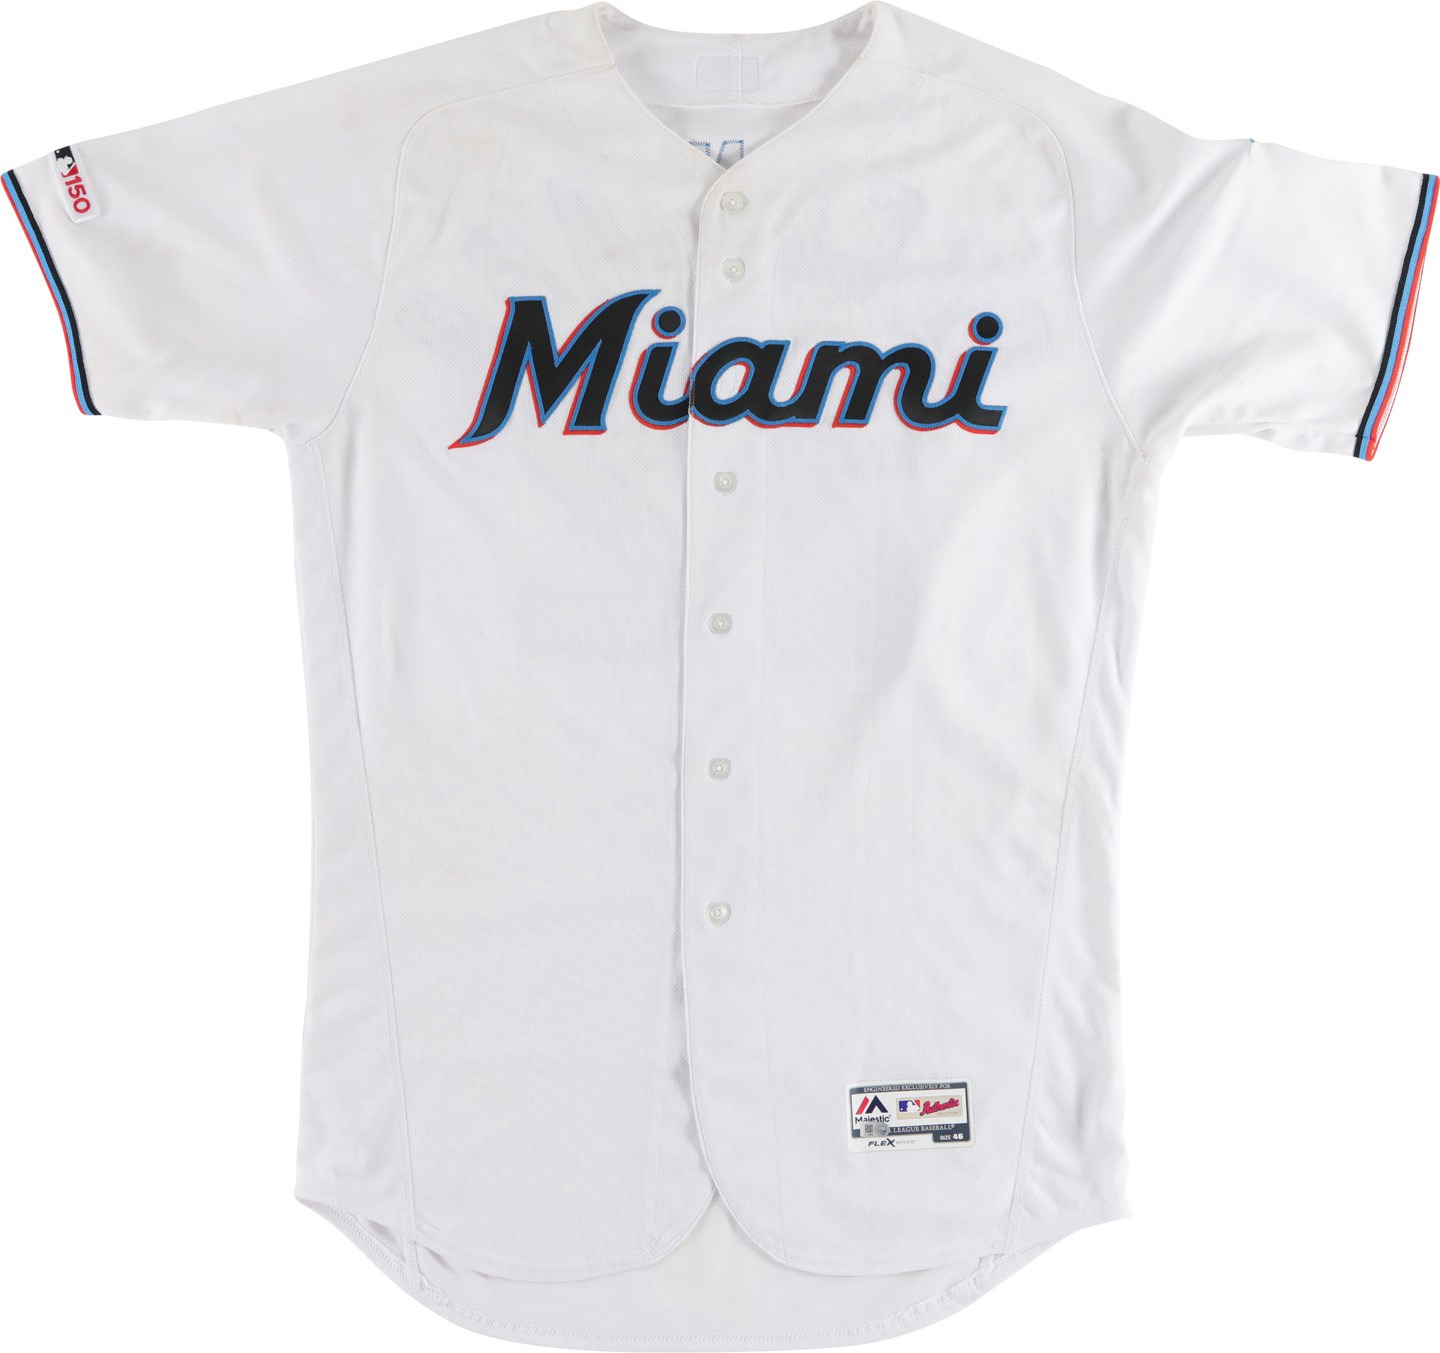 Baseball Equipment - 2019 Sandy Alcantara Miami Marlins Game Worn Jersey - Worn in Three Stars Including First Career Complete Game Shutout! (Photo-Matched & MLB Holo)